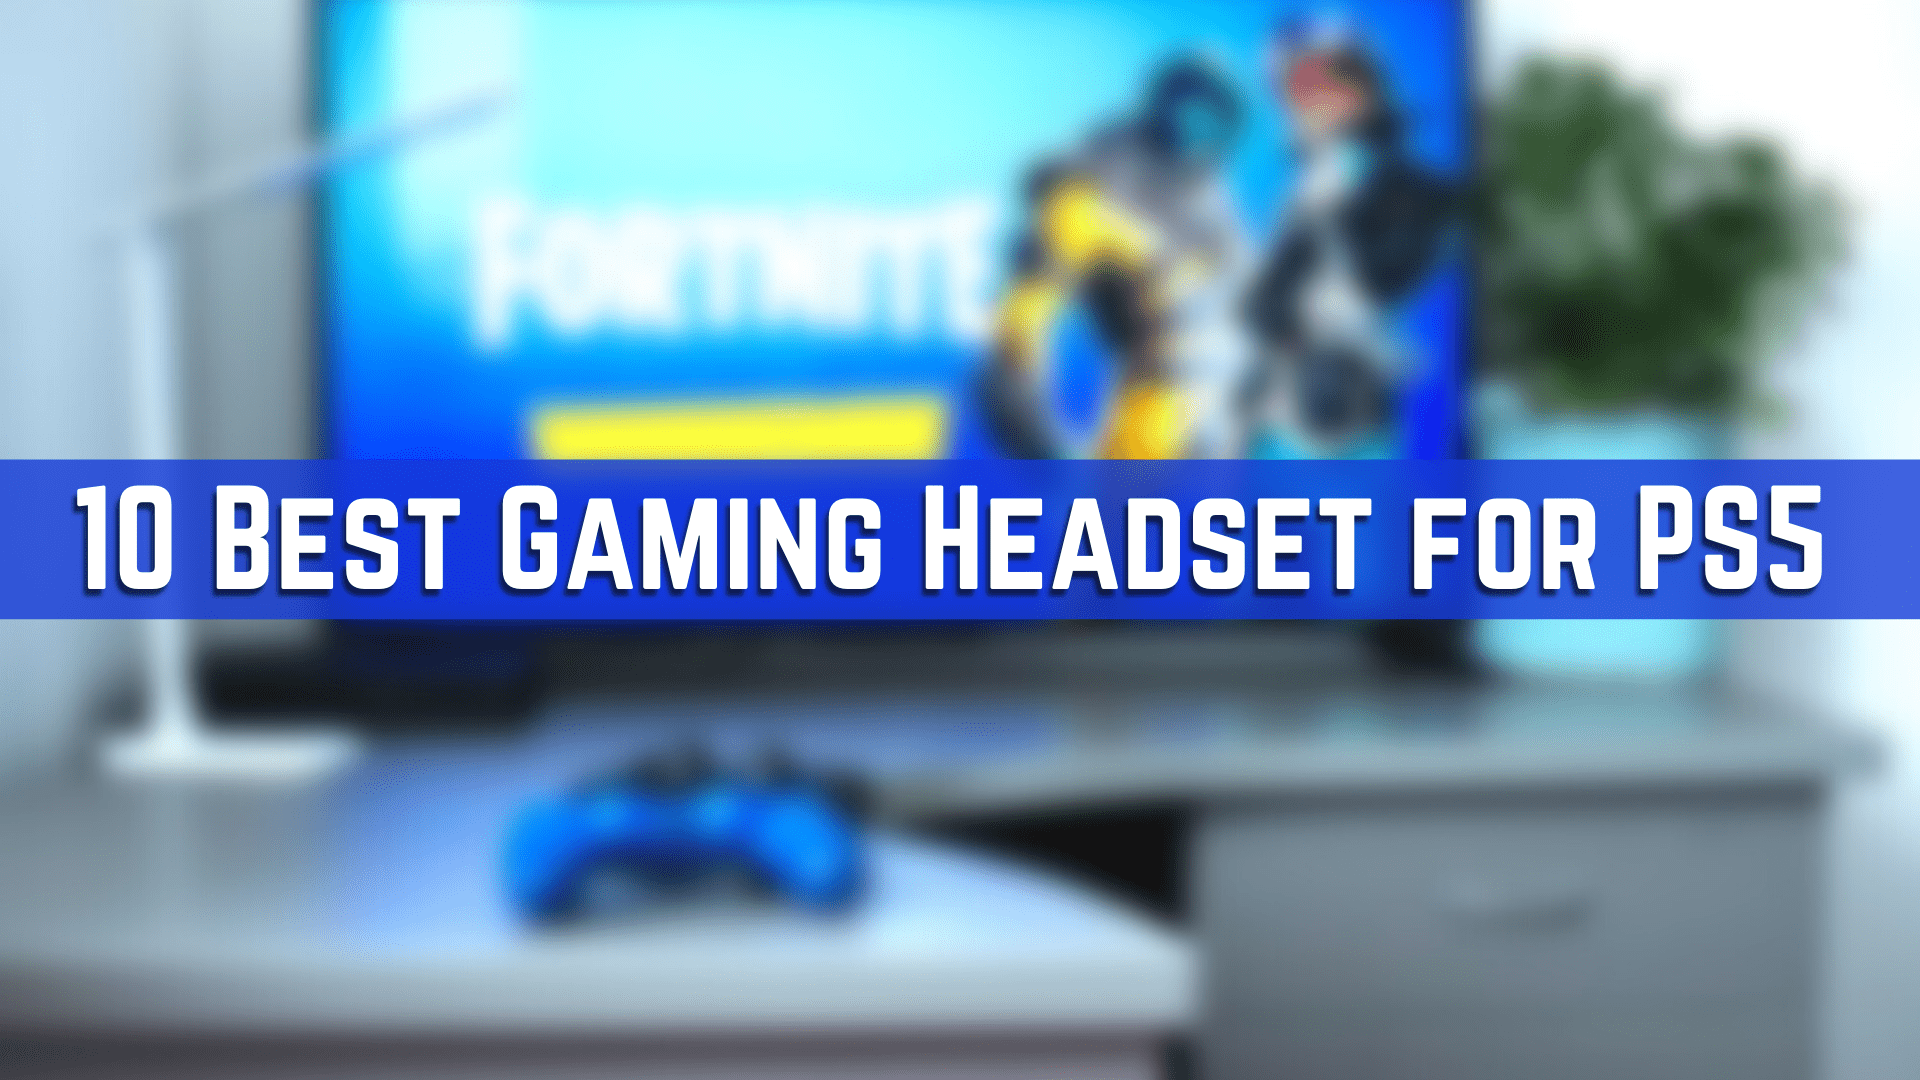 Best Gaming Headset for PS5